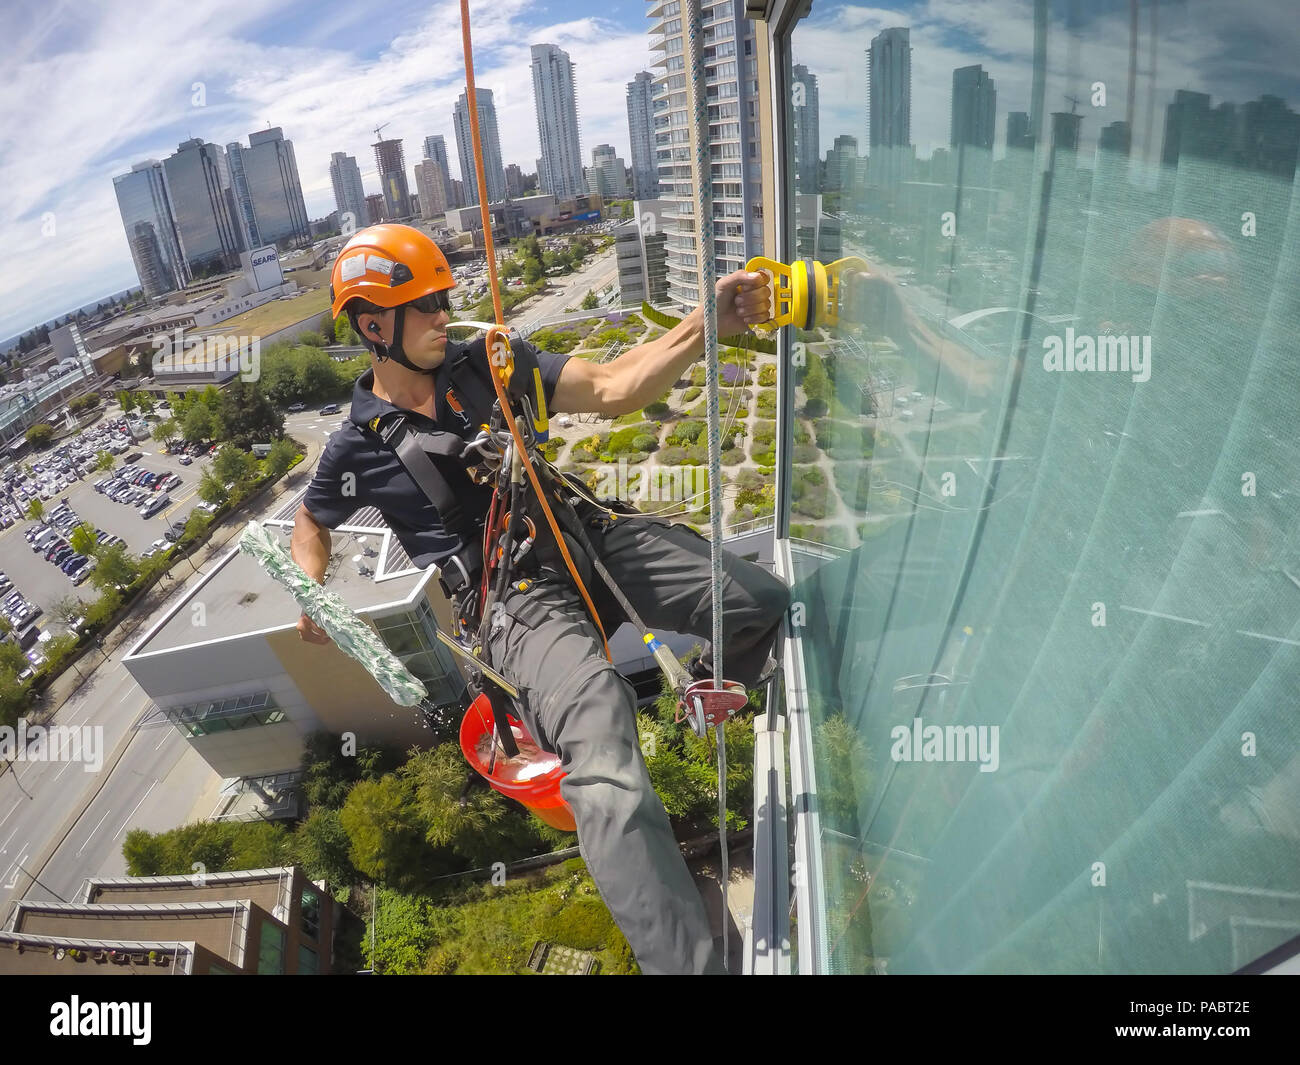 https://c8.alamy.com/comp/PABT2E/burnaby-greater-vancouver-british-columbia-canada-june-17-2018-high-rise-window-cleaner-is-hanging-on-the-side-of-the-building-and-working-PABT2E.jpg